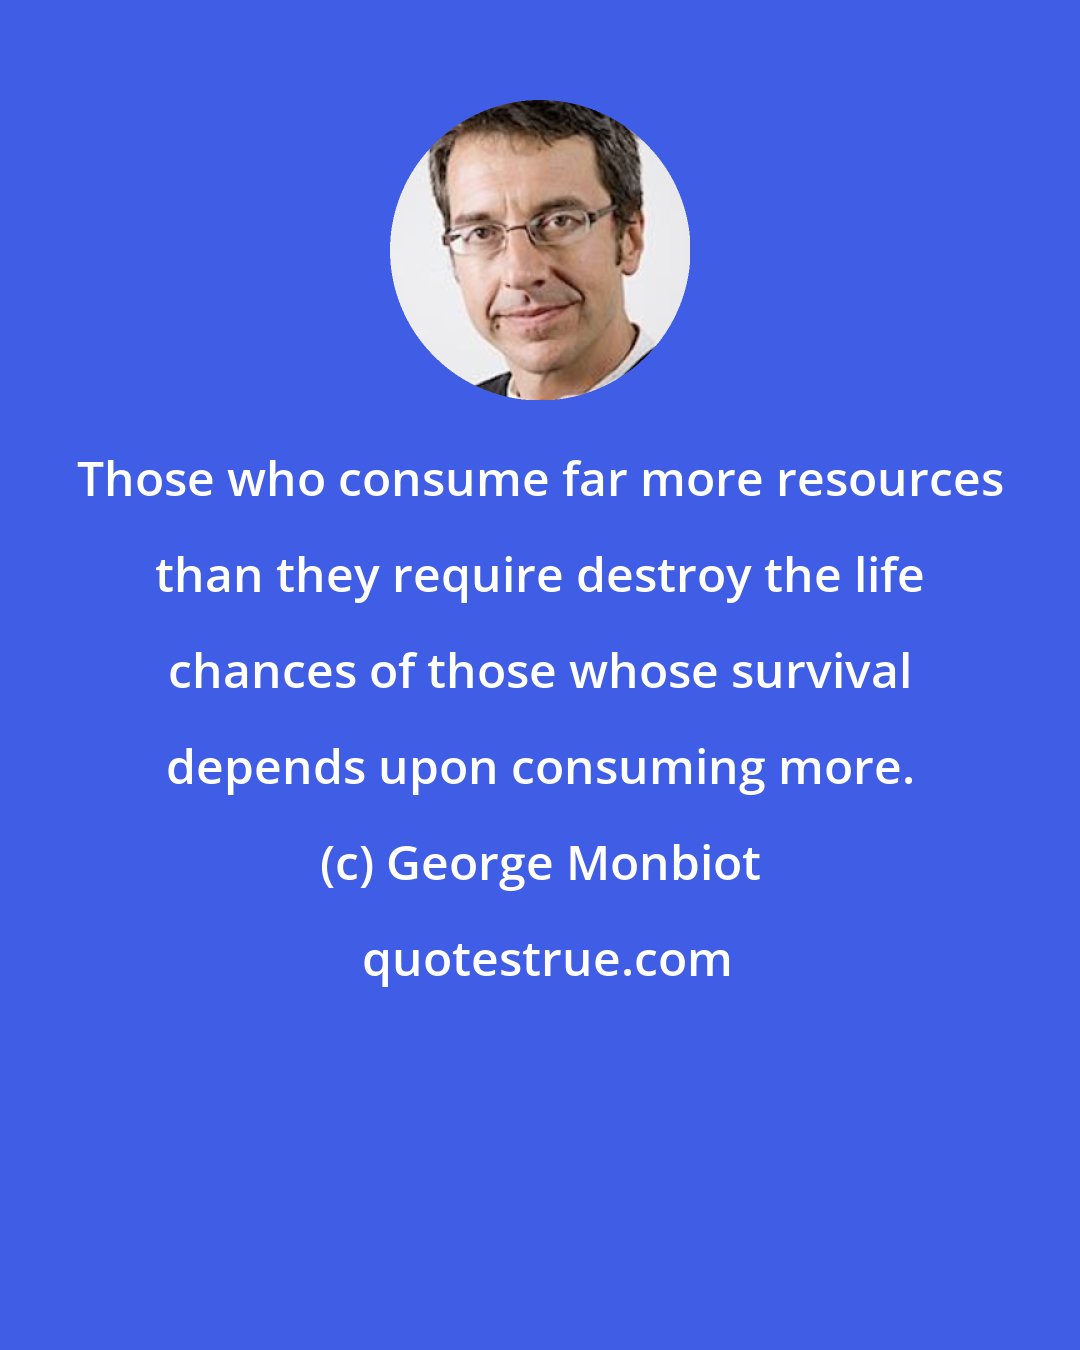 George Monbiot: Those who consume far more resources than they require destroy the life chances of those whose survival depends upon consuming more.